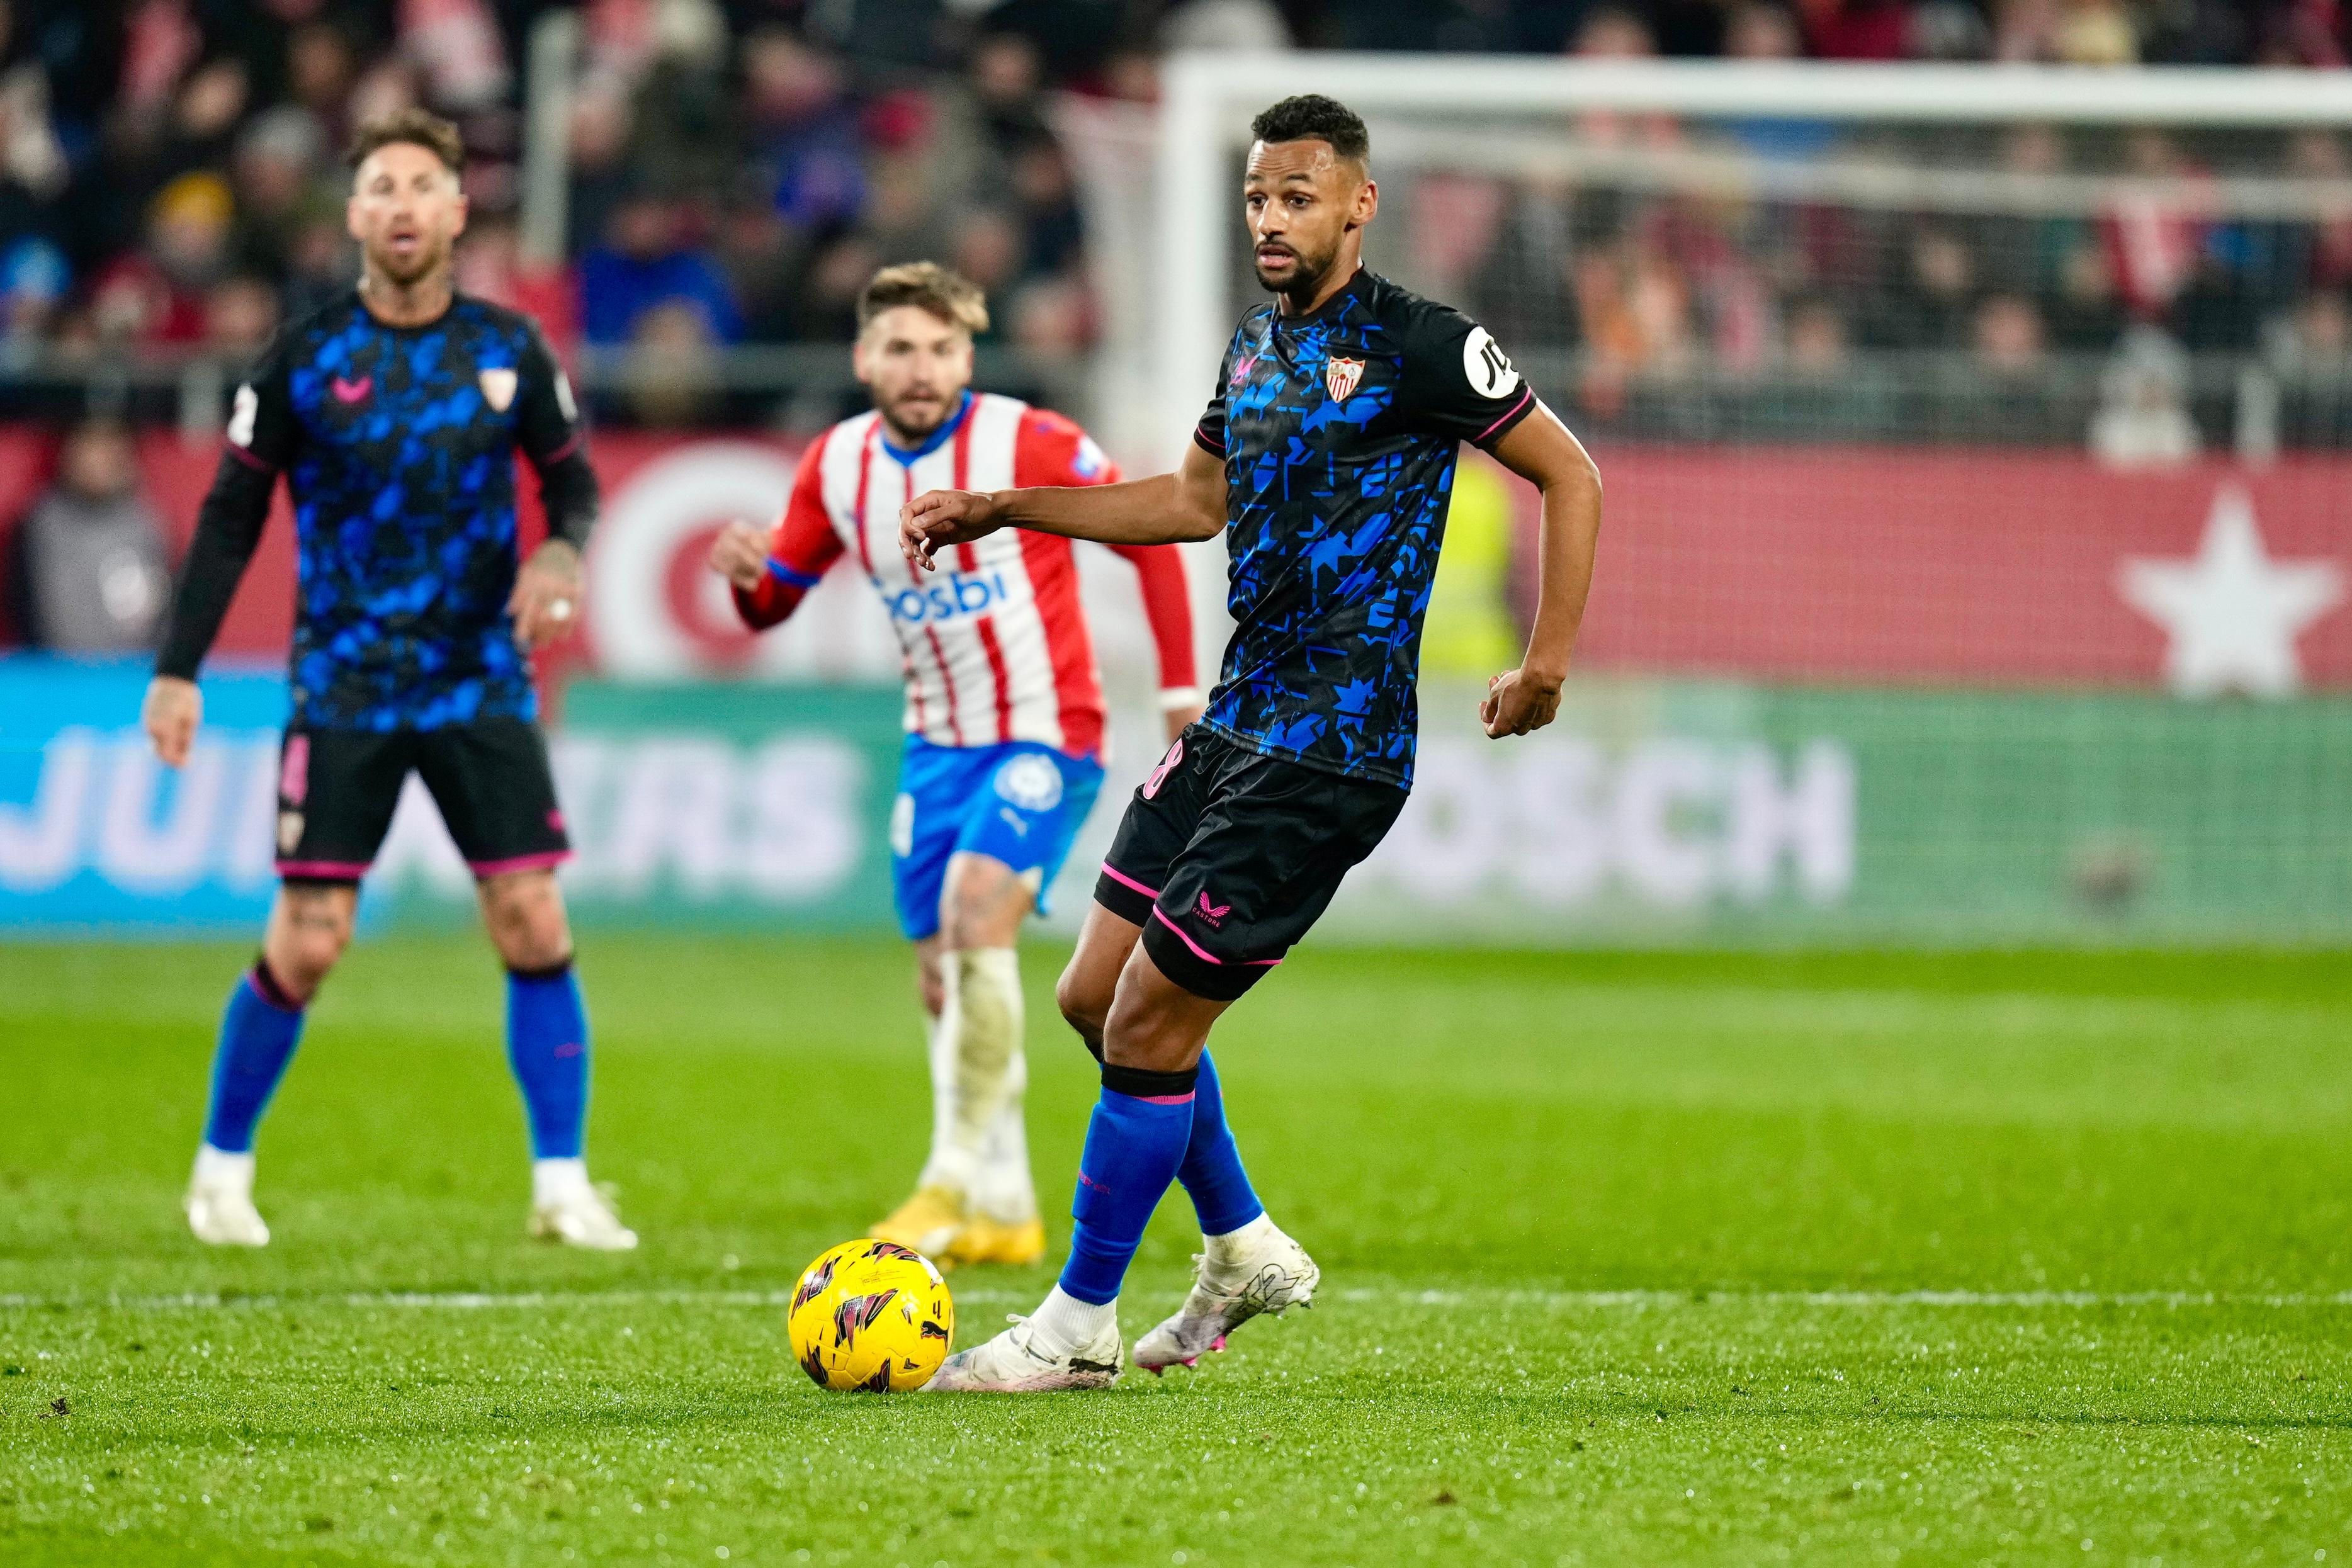 Sow in action against Girona FC